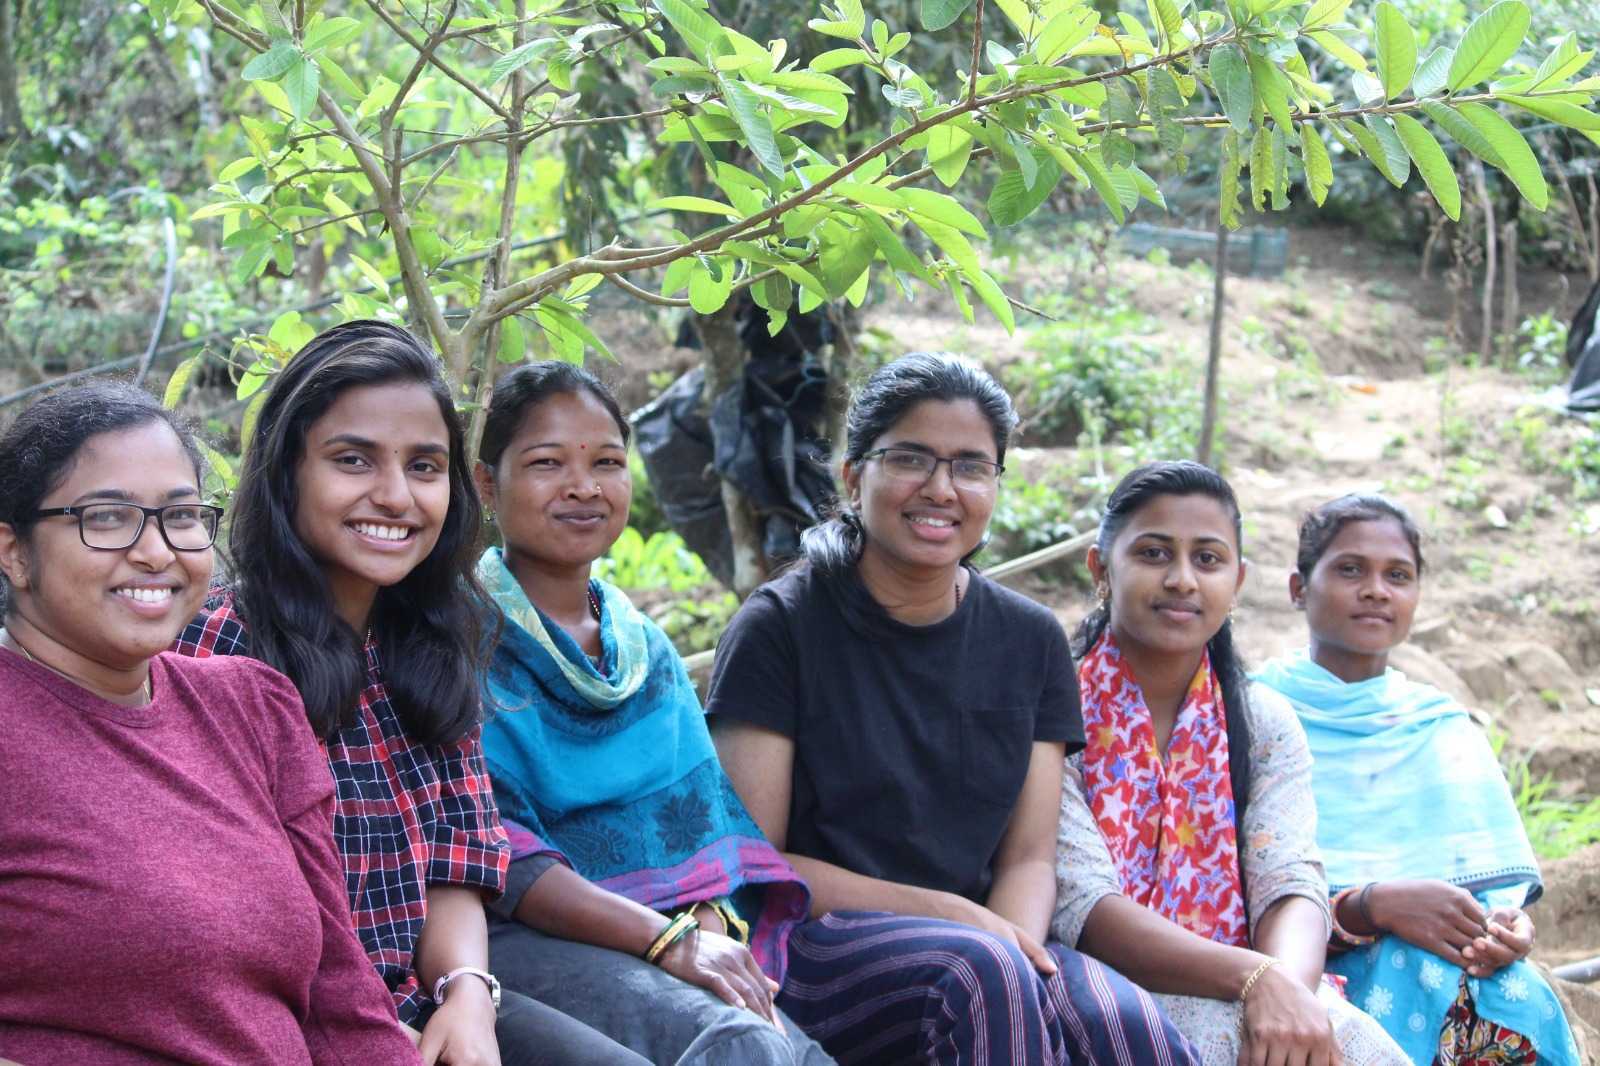 The team at Graamya works with farmers in Idukki, Kerala to empower them to transition to organic farming